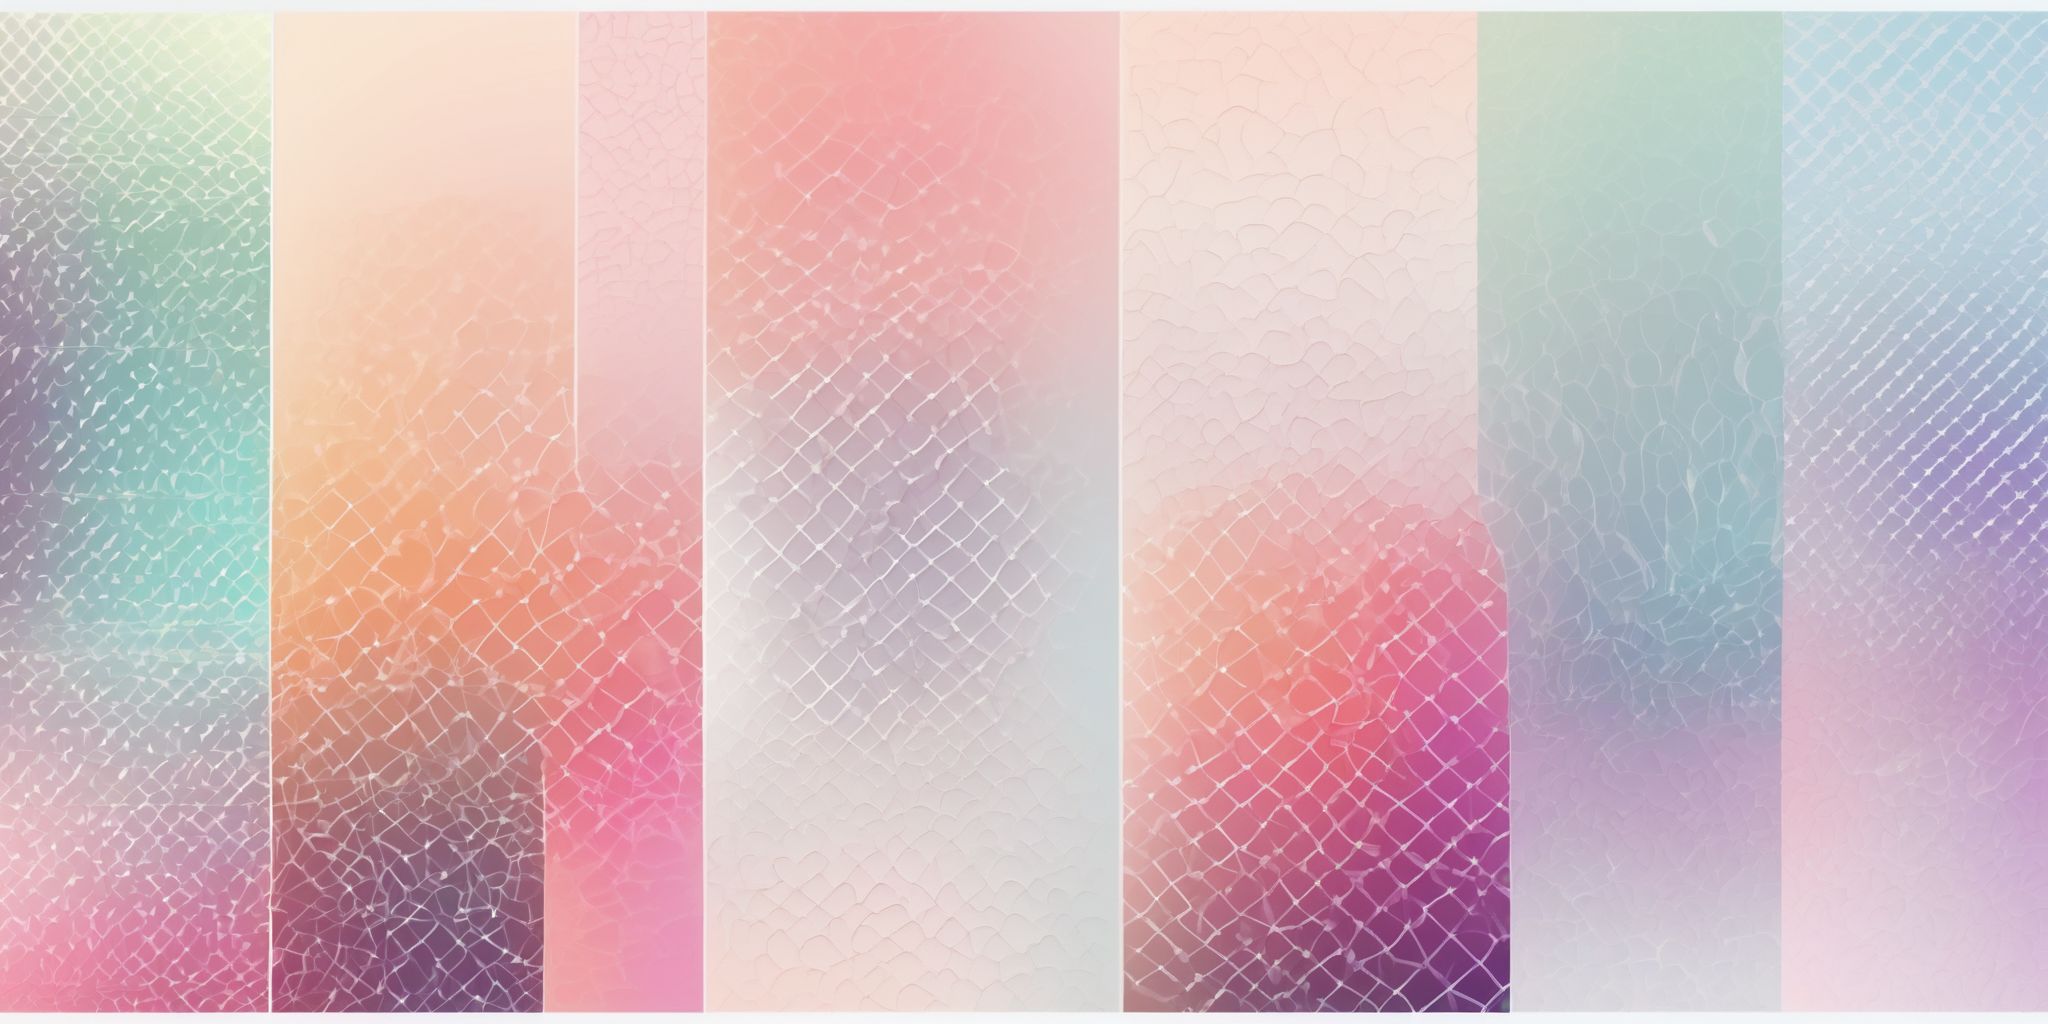 Filters in illustration style with gradients and white background